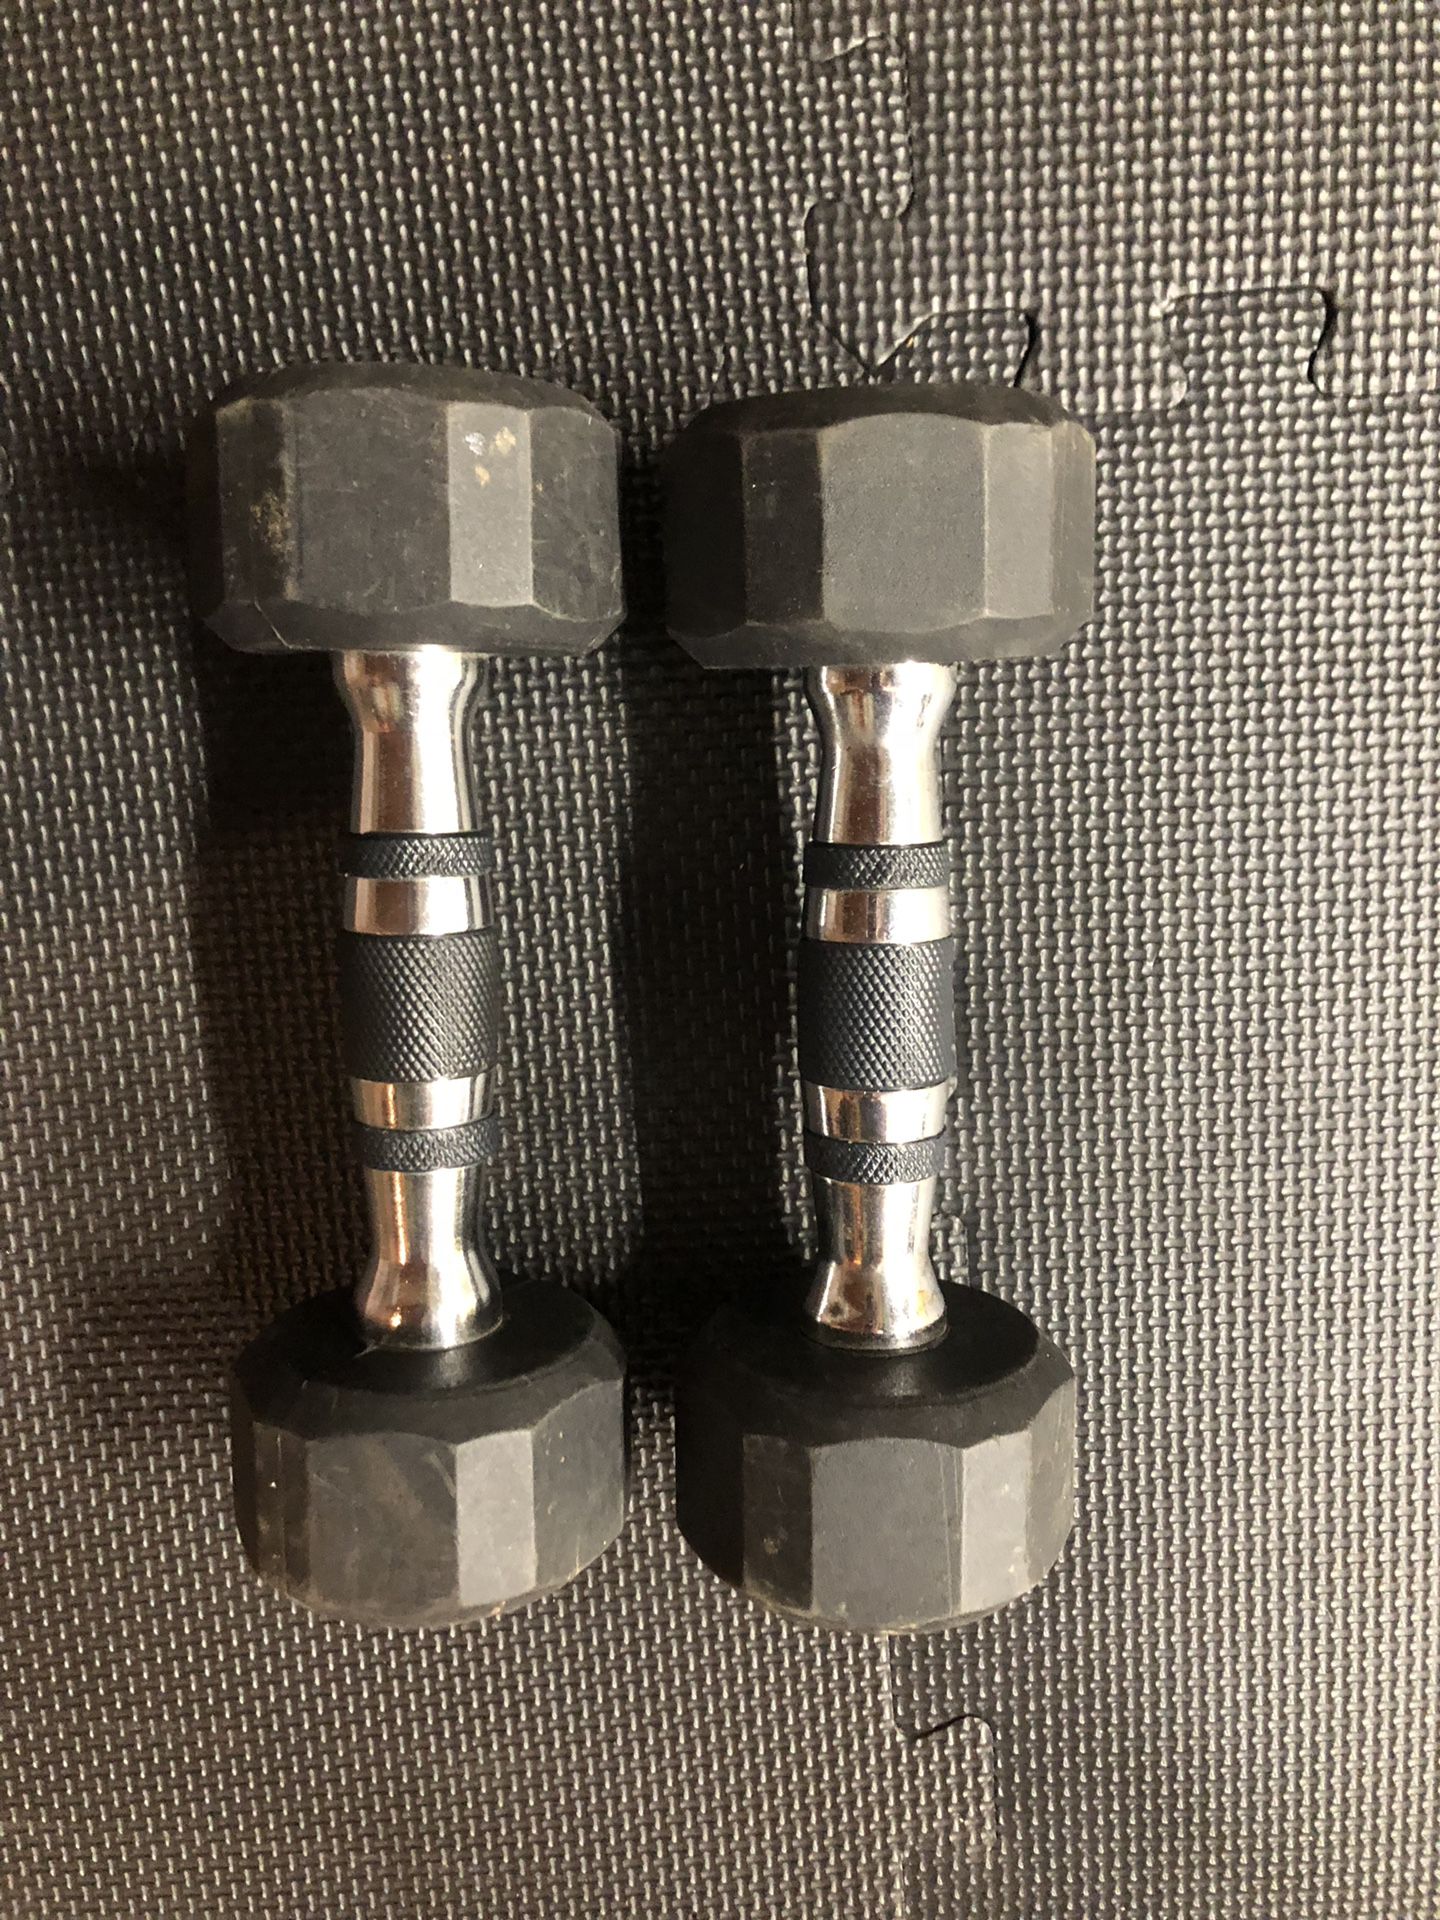 5 pound pair of rubber dumbbells